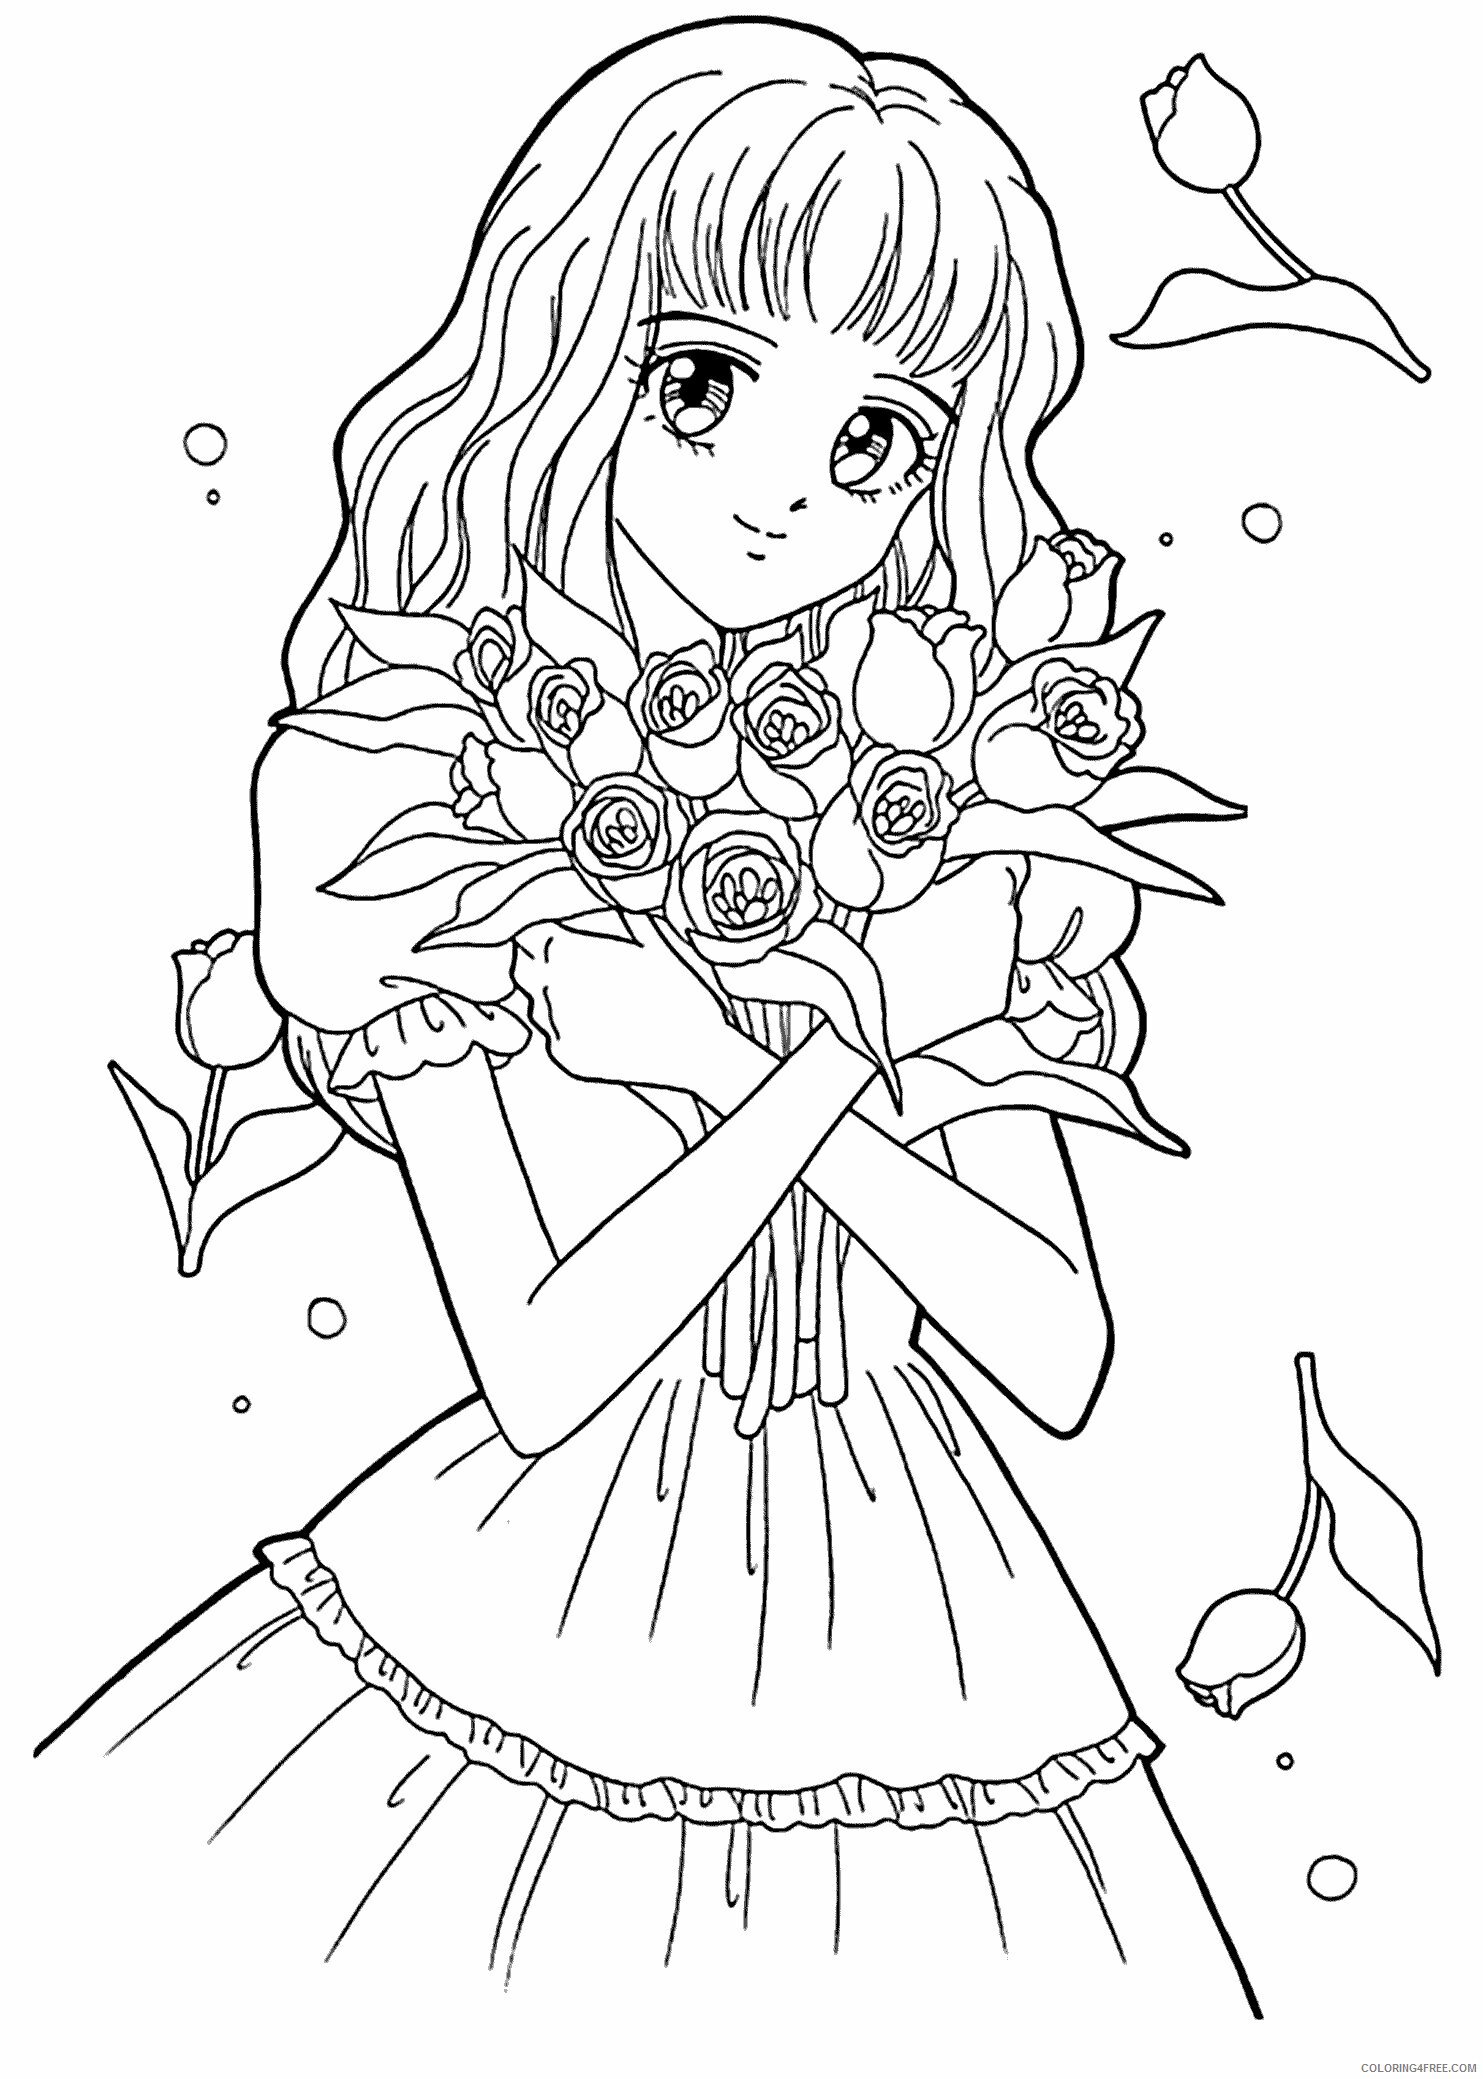 9,940 Anime Coloring Pages Images, Stock Photos & Vectors | Shutterstock